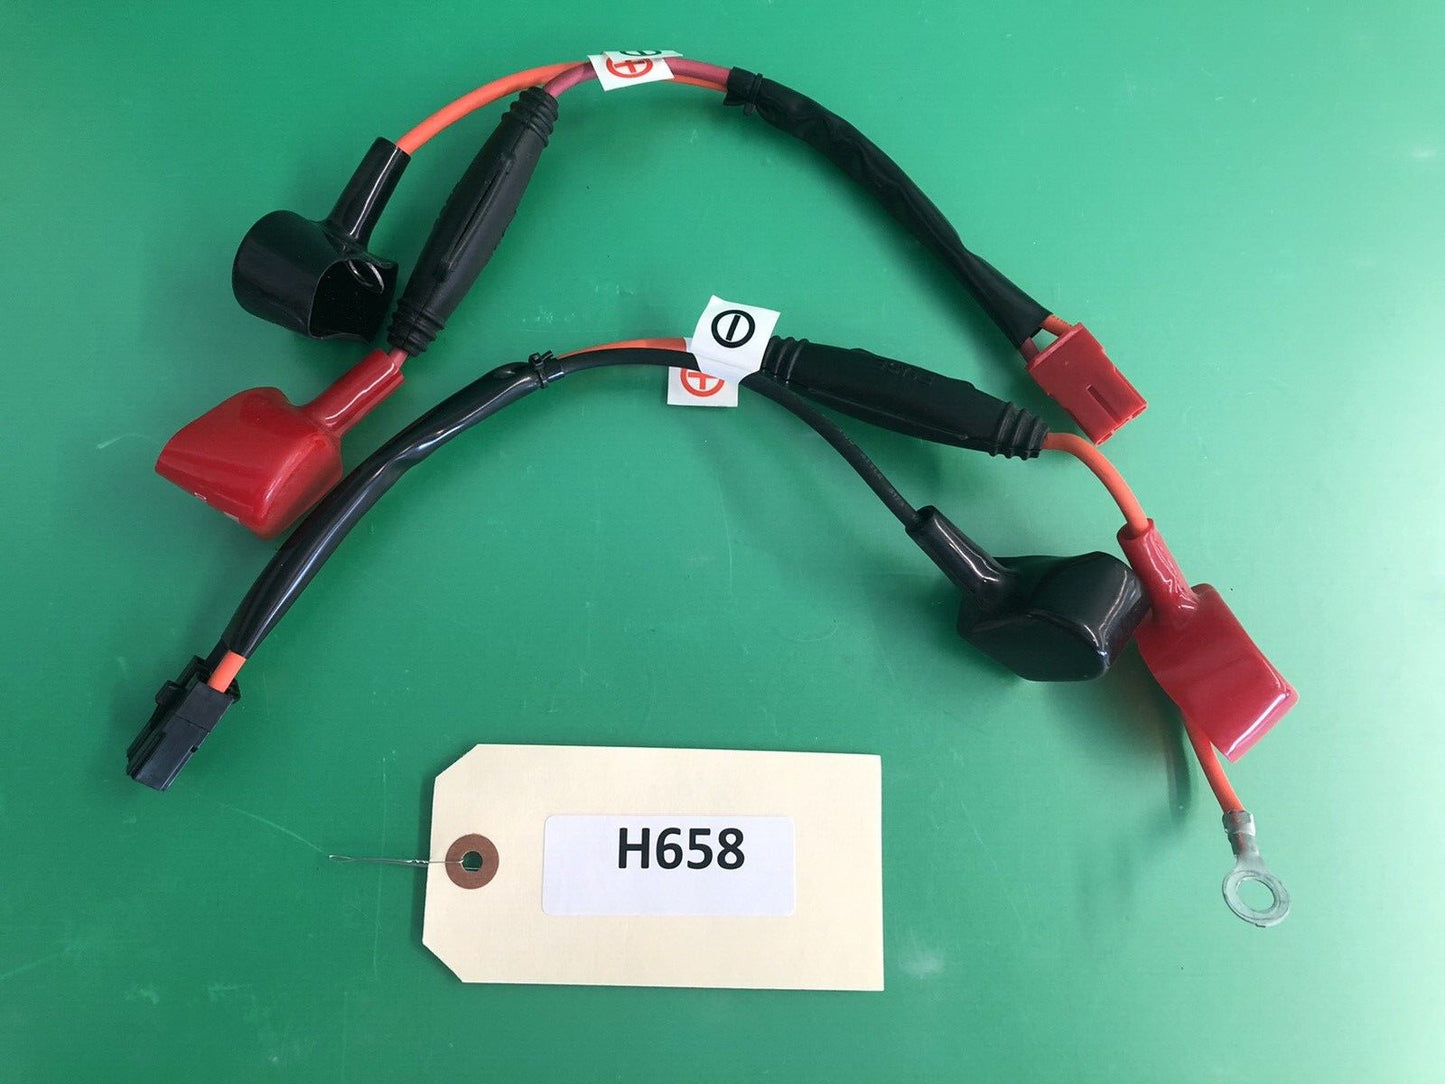 Battery Wiring Harness for Golden Companion Scooter GC240 GC440 GC340 #H658